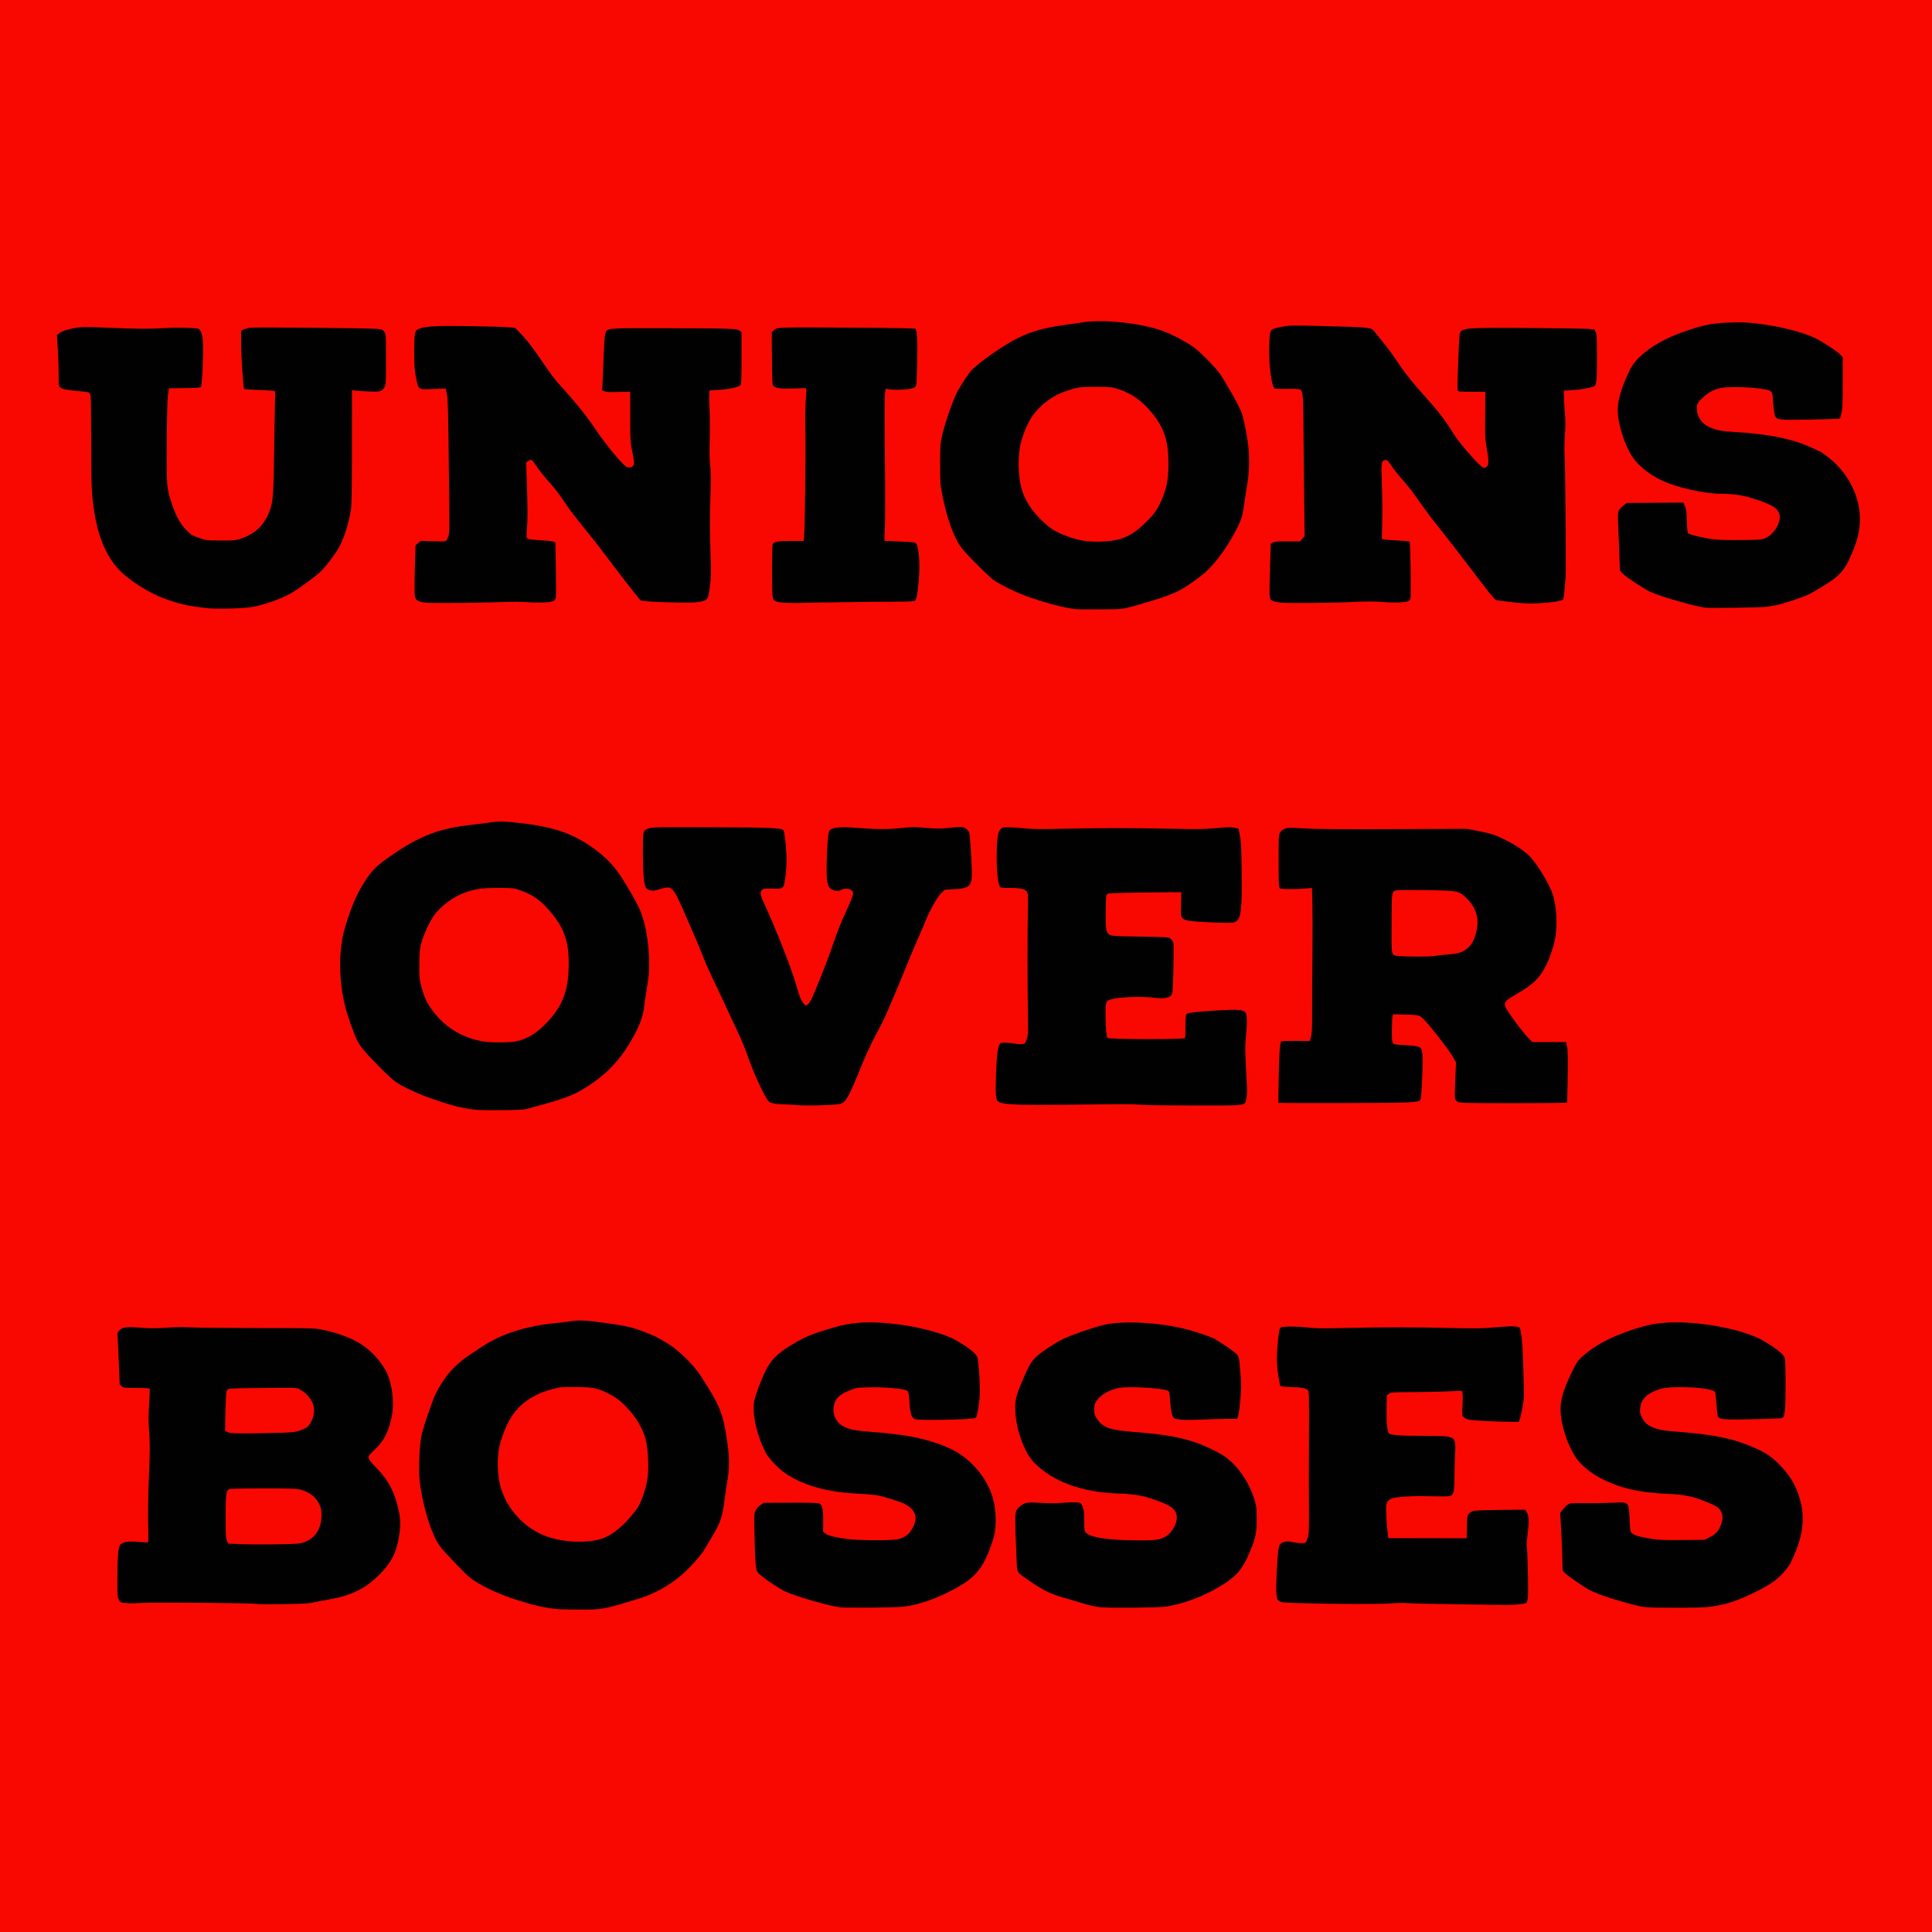 Unions over bosses